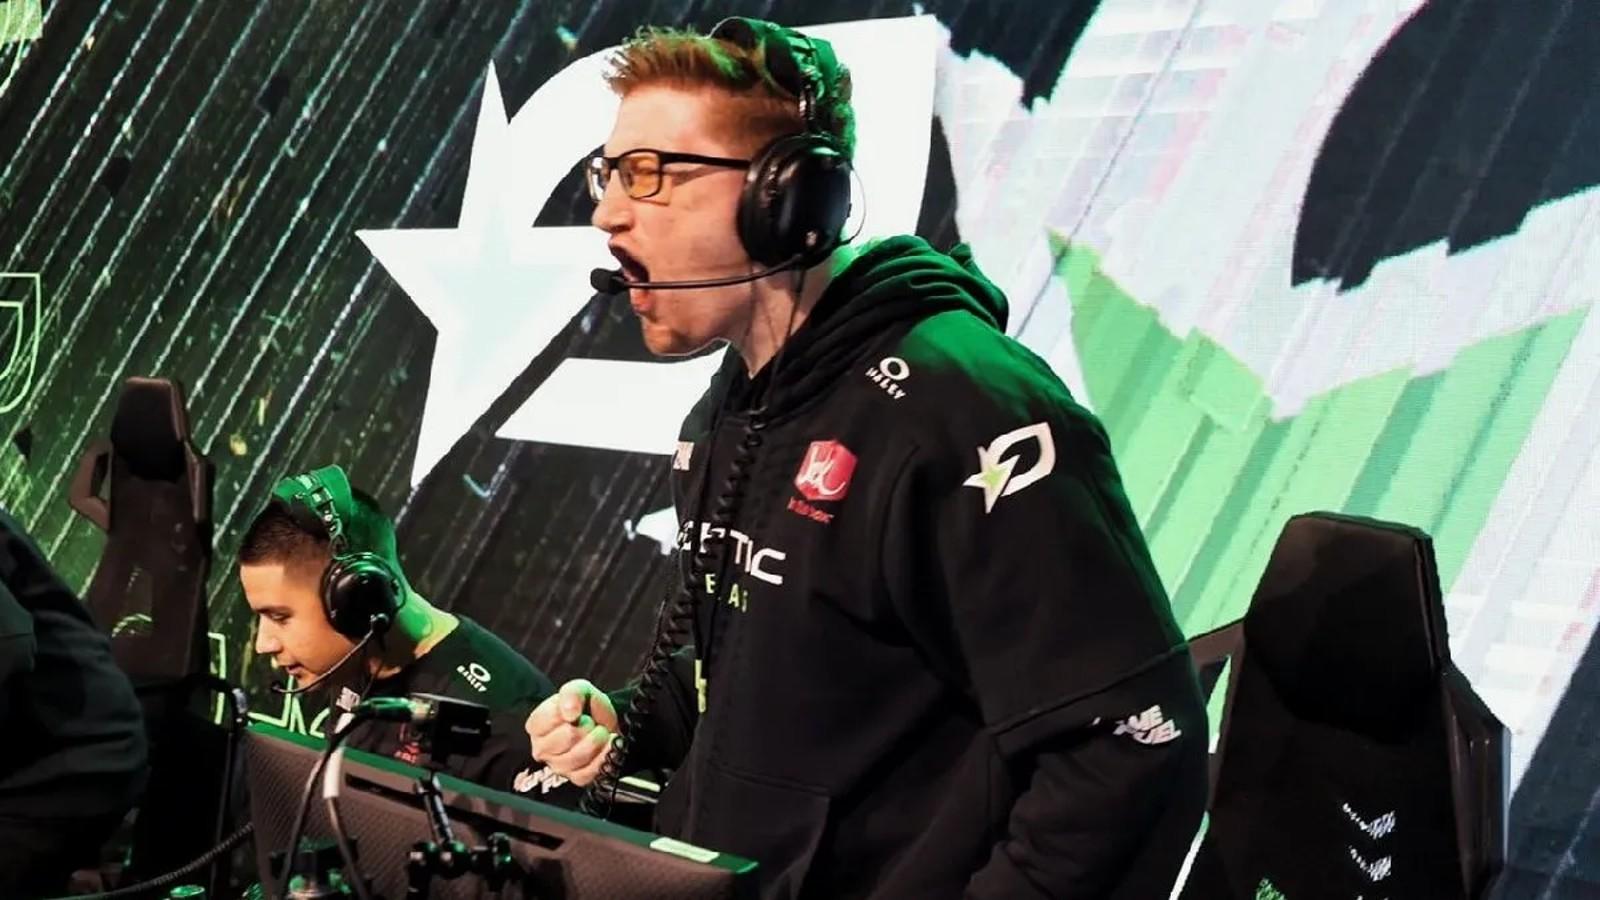 CoD fans bombard CDL & Activision with demands to free Scump - Dexerto